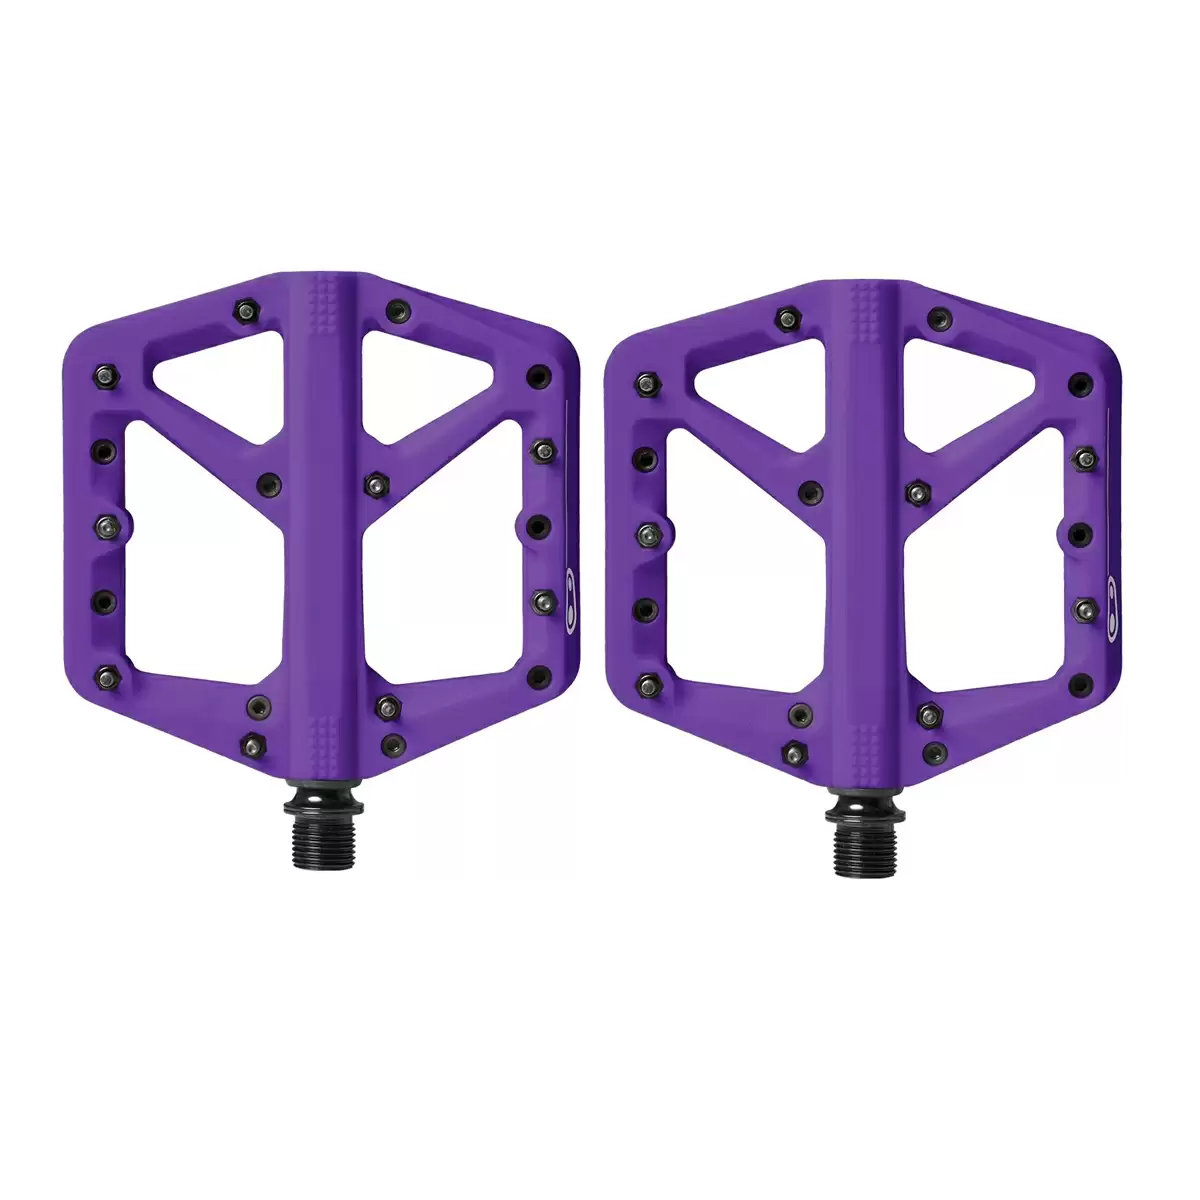 Pair of pedals Stamp 1 small purple - image